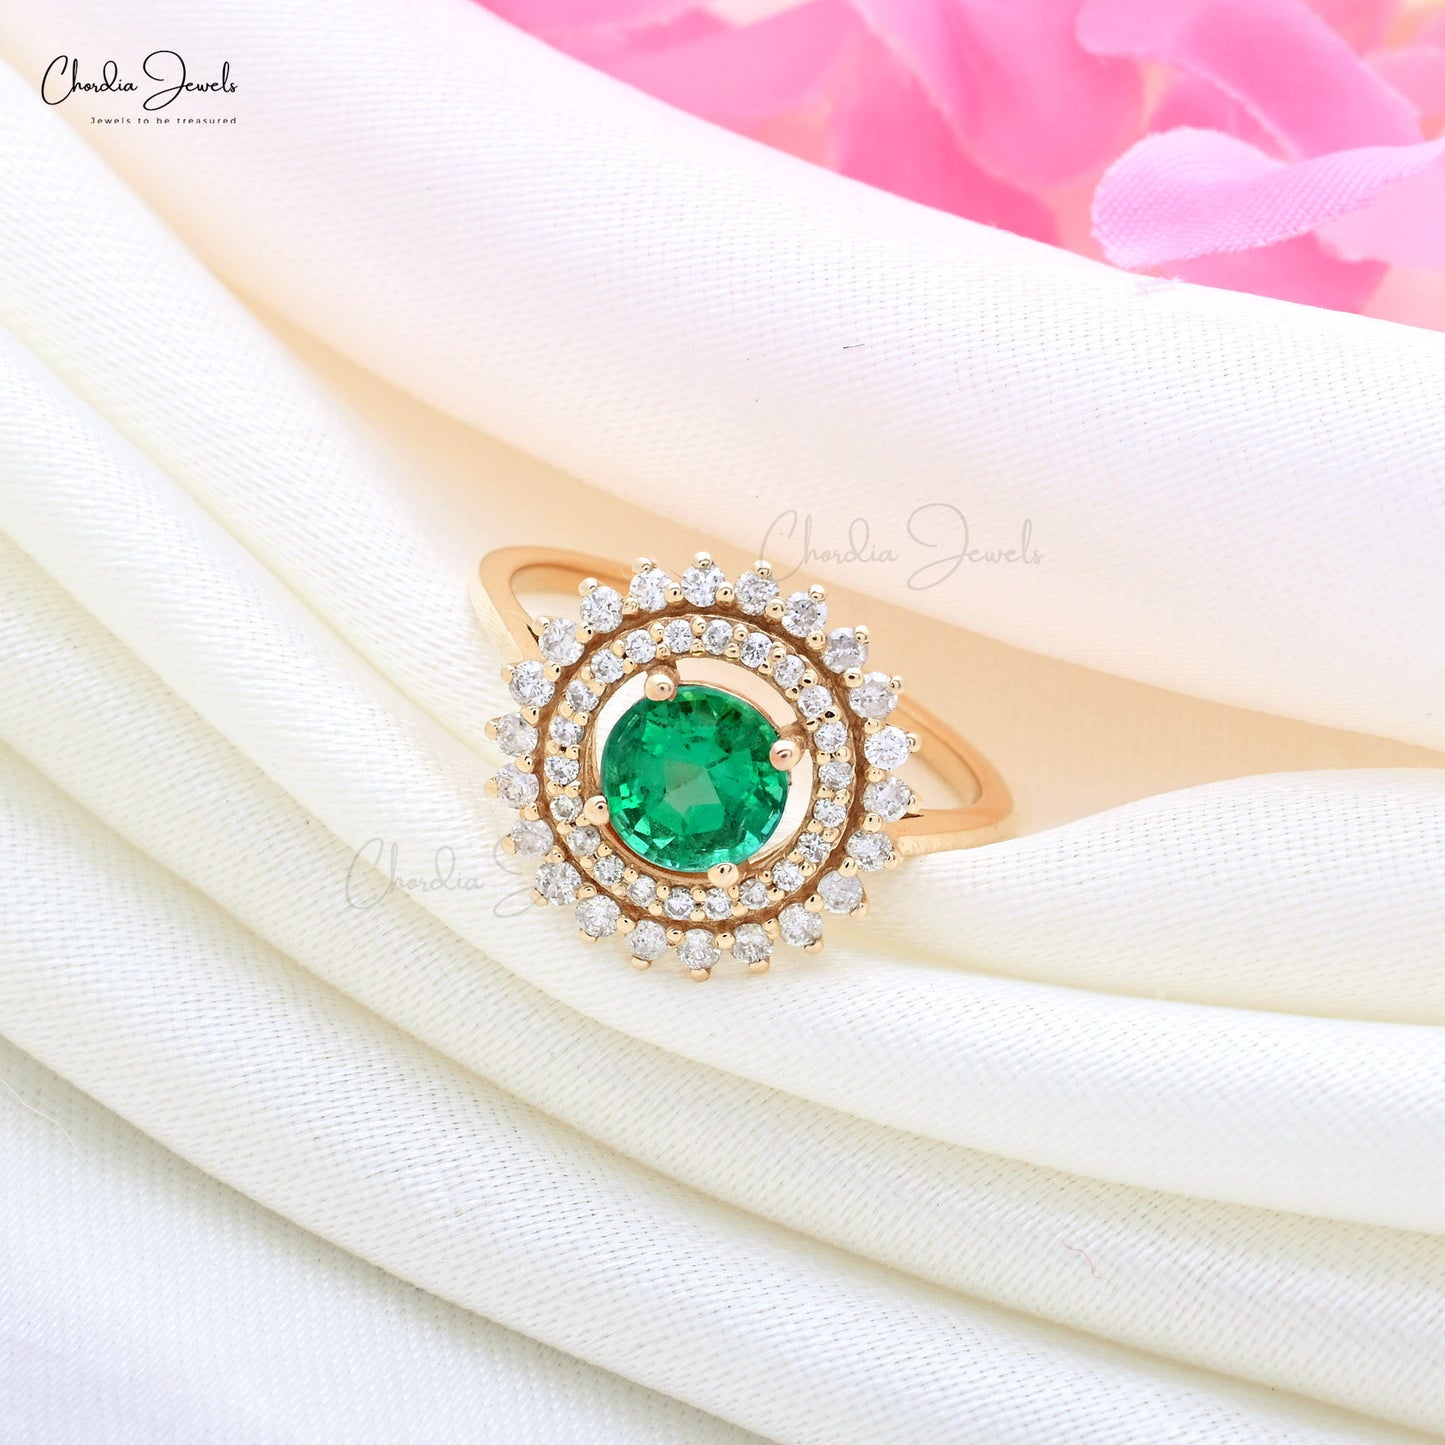 Transform your style with our real emerald ring.